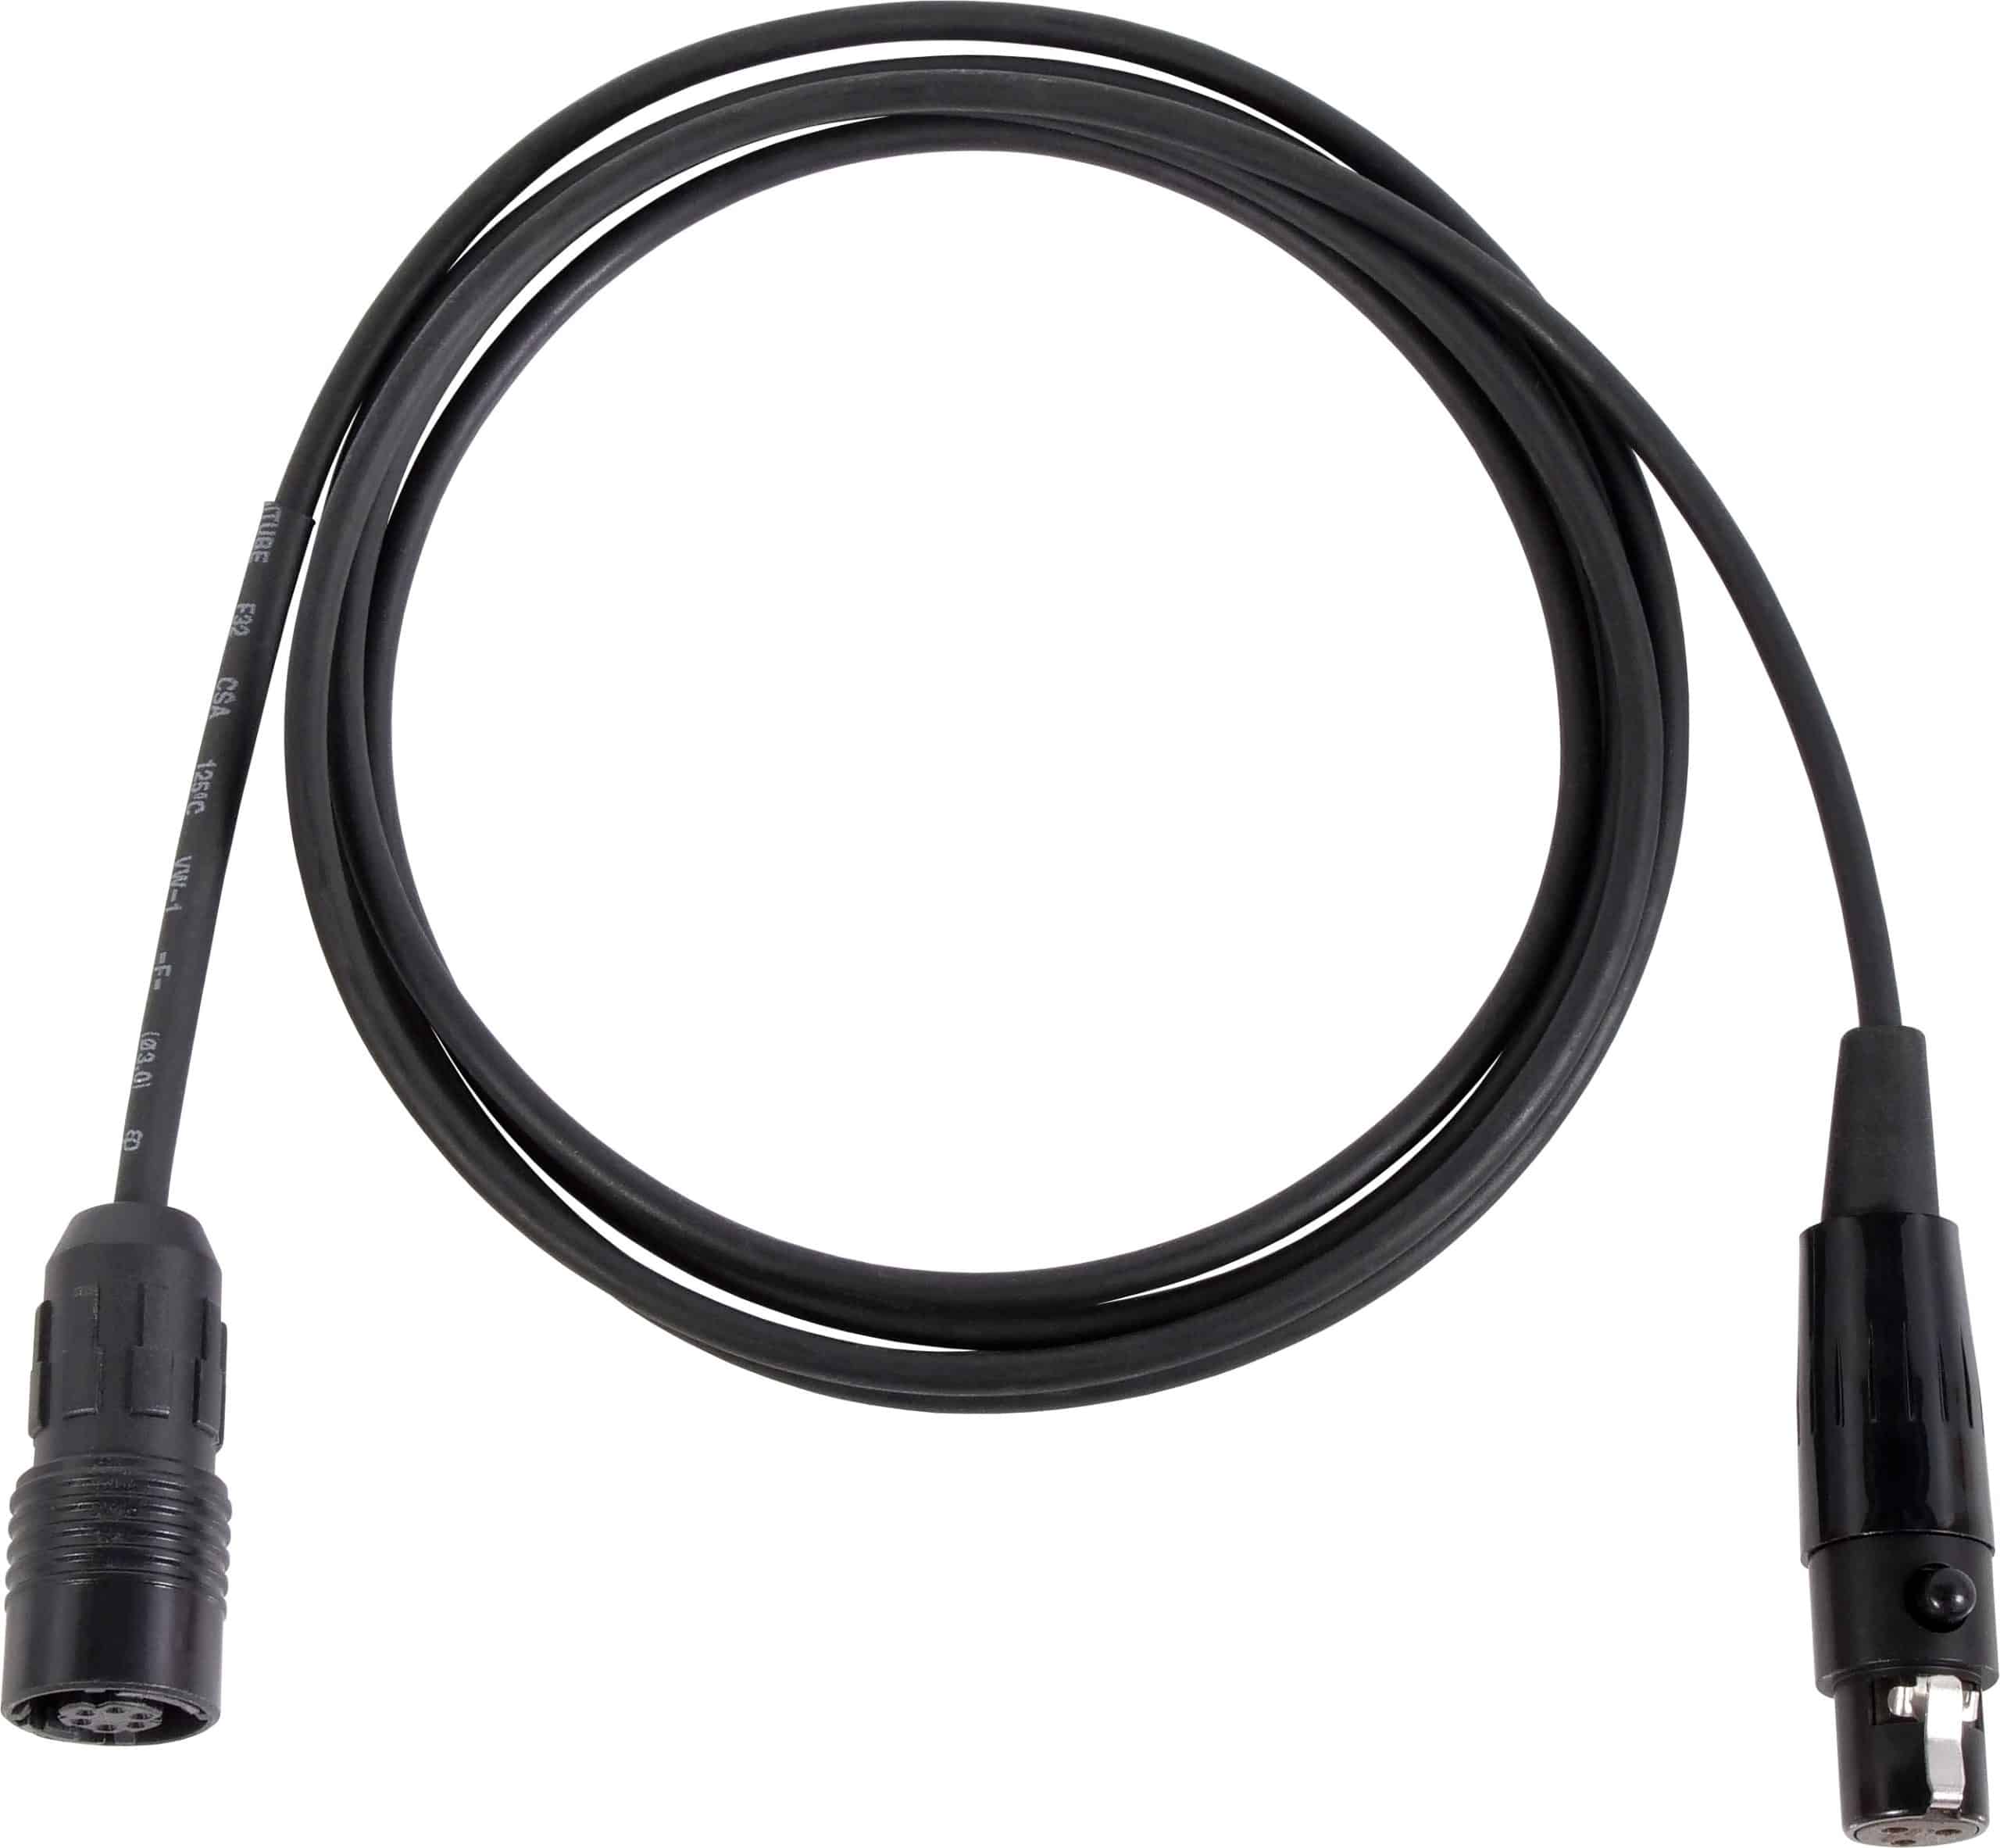 CBL2OGALBK Cable – For H2O7 Wireless Headset Mic Cable for Galaxy Audio® systems